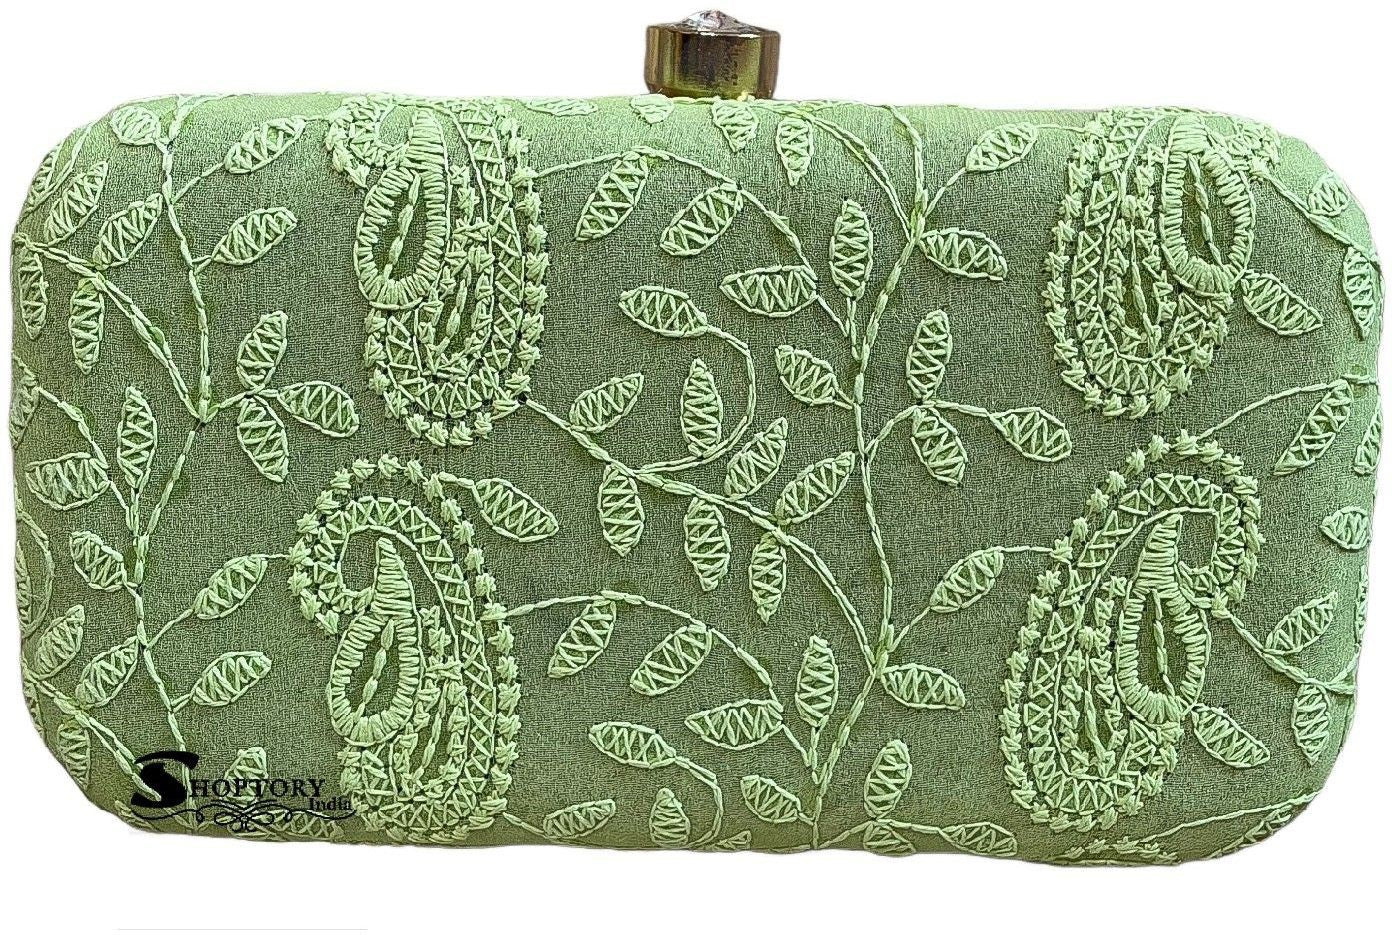 Women's Chicken Box Clutch Bag Purse For Bridal, Casual, Party, Wedding - Pista - Ritzie